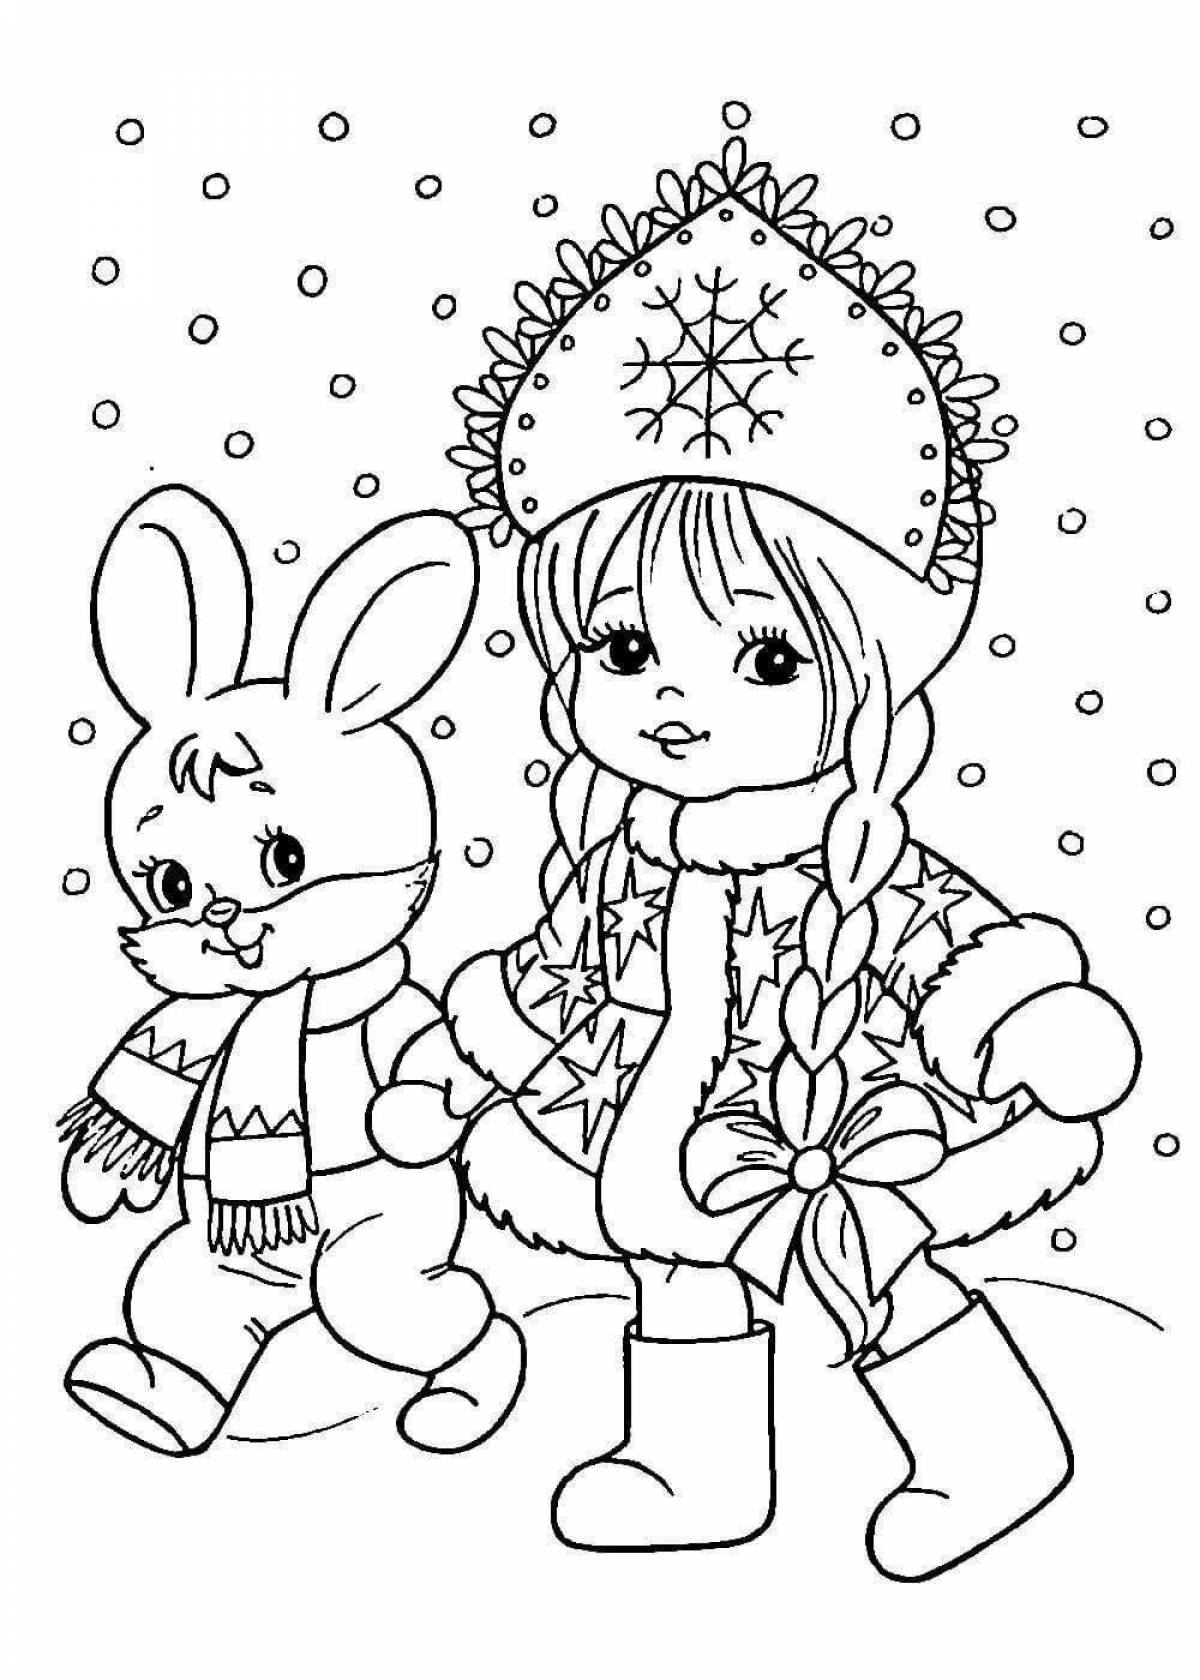 Finished coloring Snow Maiden